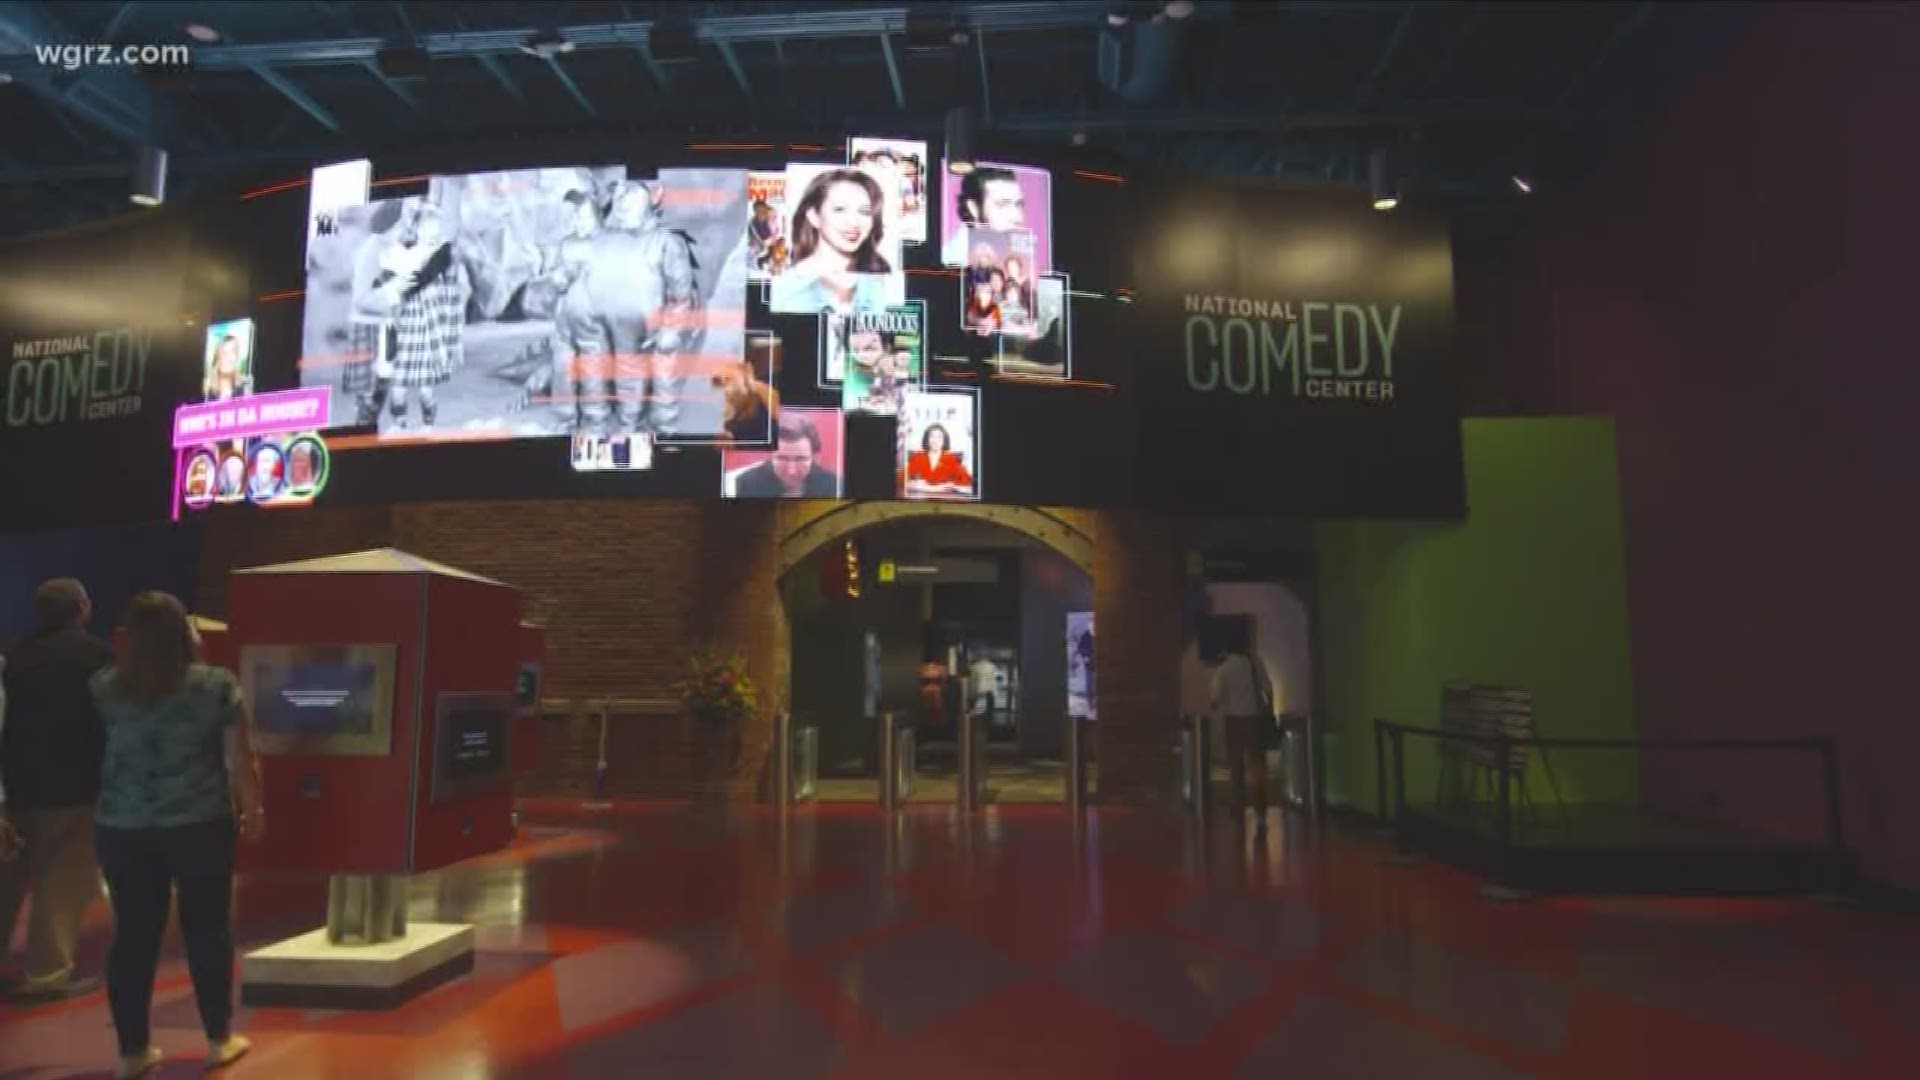 National Comedy Center In Jamestown Ny In The Running For Nation S Best New Attraction